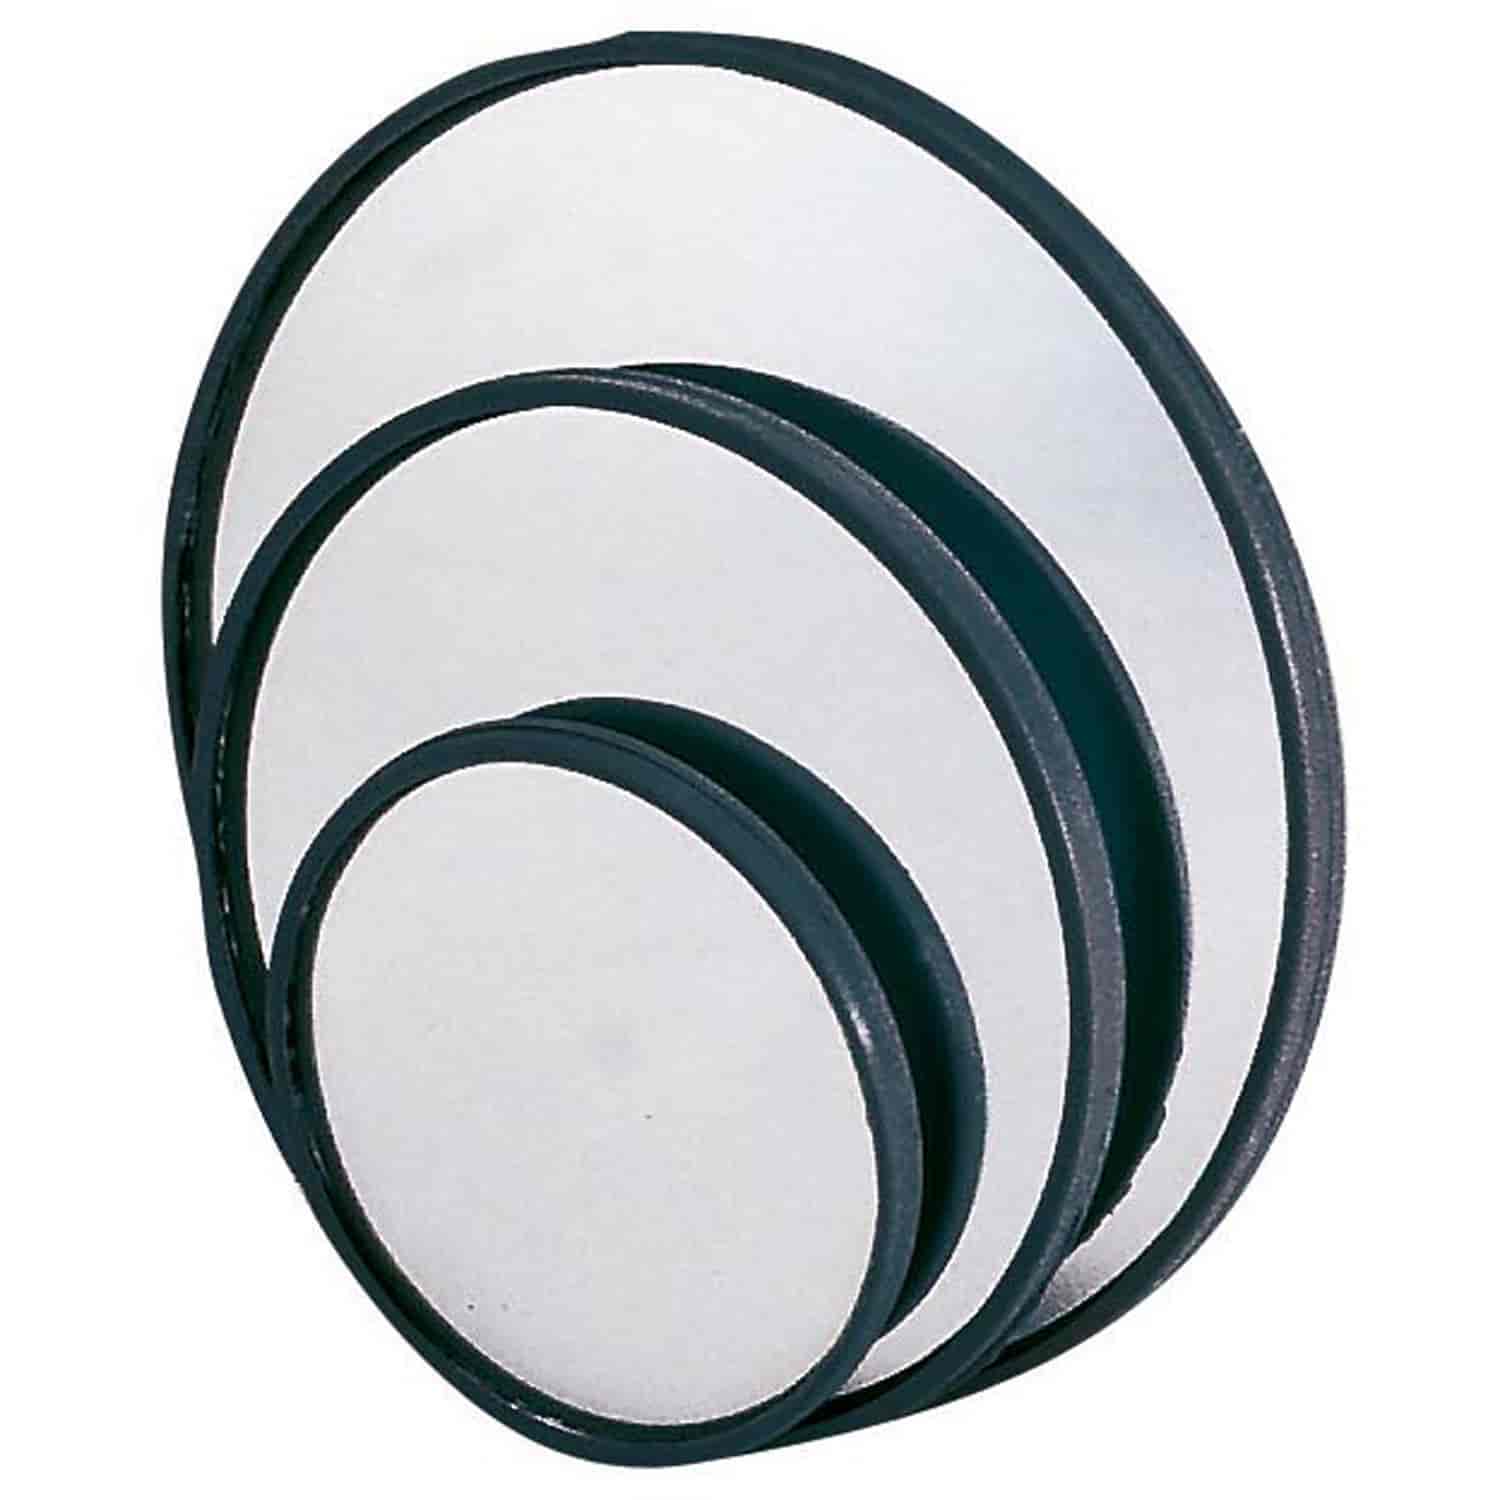 Stick-On Round Mirror This mirror is 3 inches in diameter.